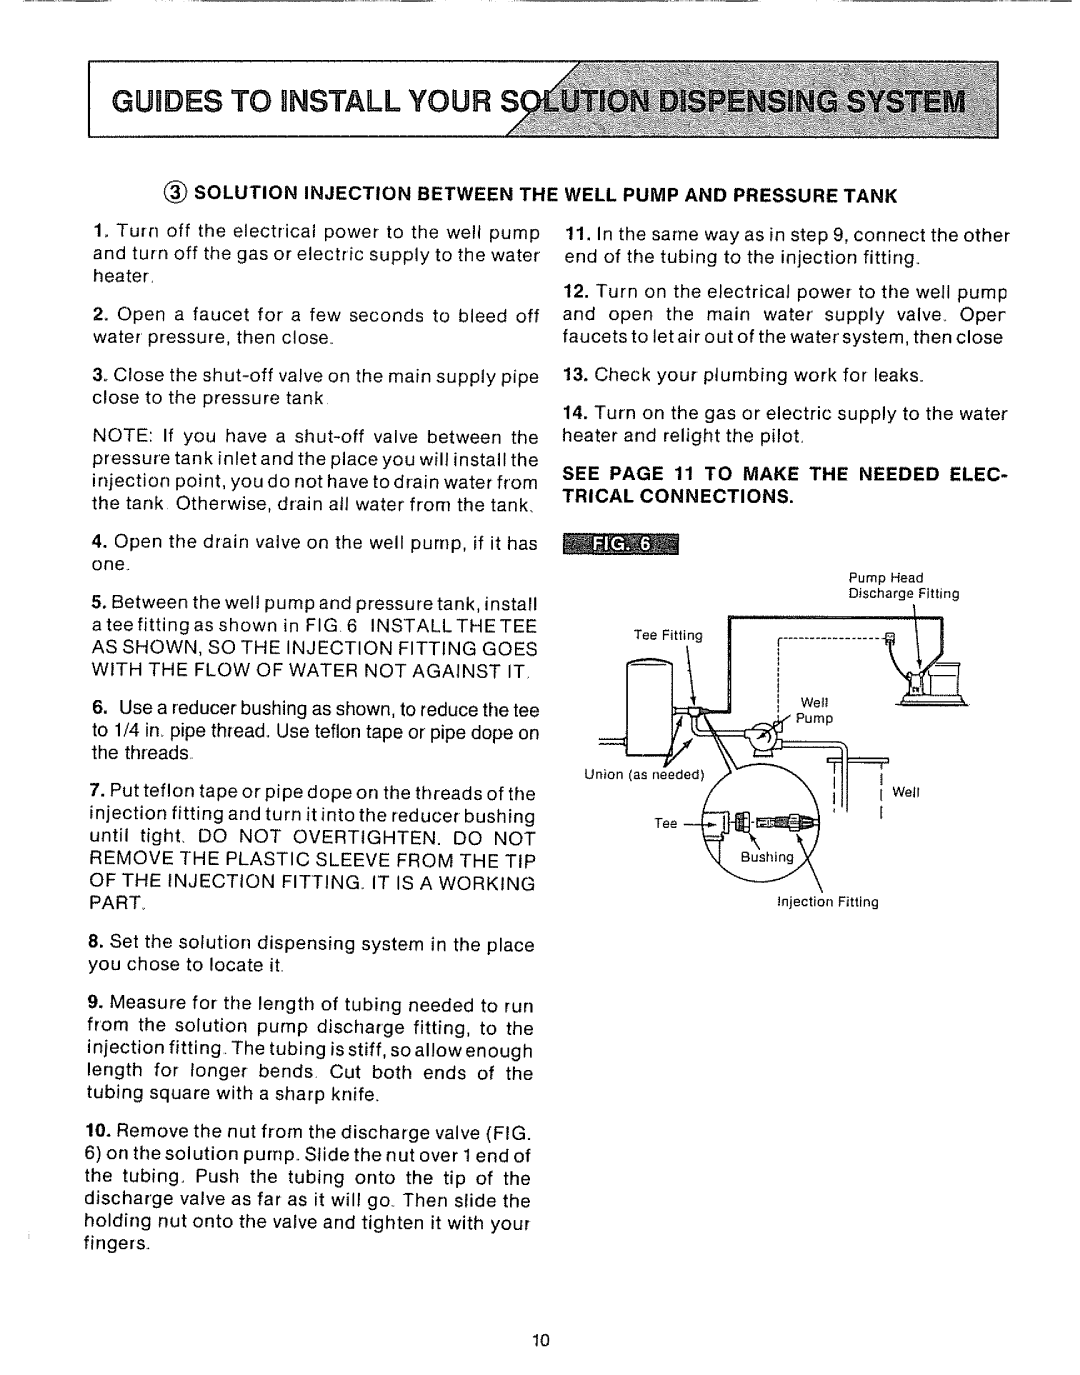 Sears 625.34929 owner manual y, TeoF,.,o0I, I Guides To, Solution Injection Between The, Well Pump And Pressure Tank 